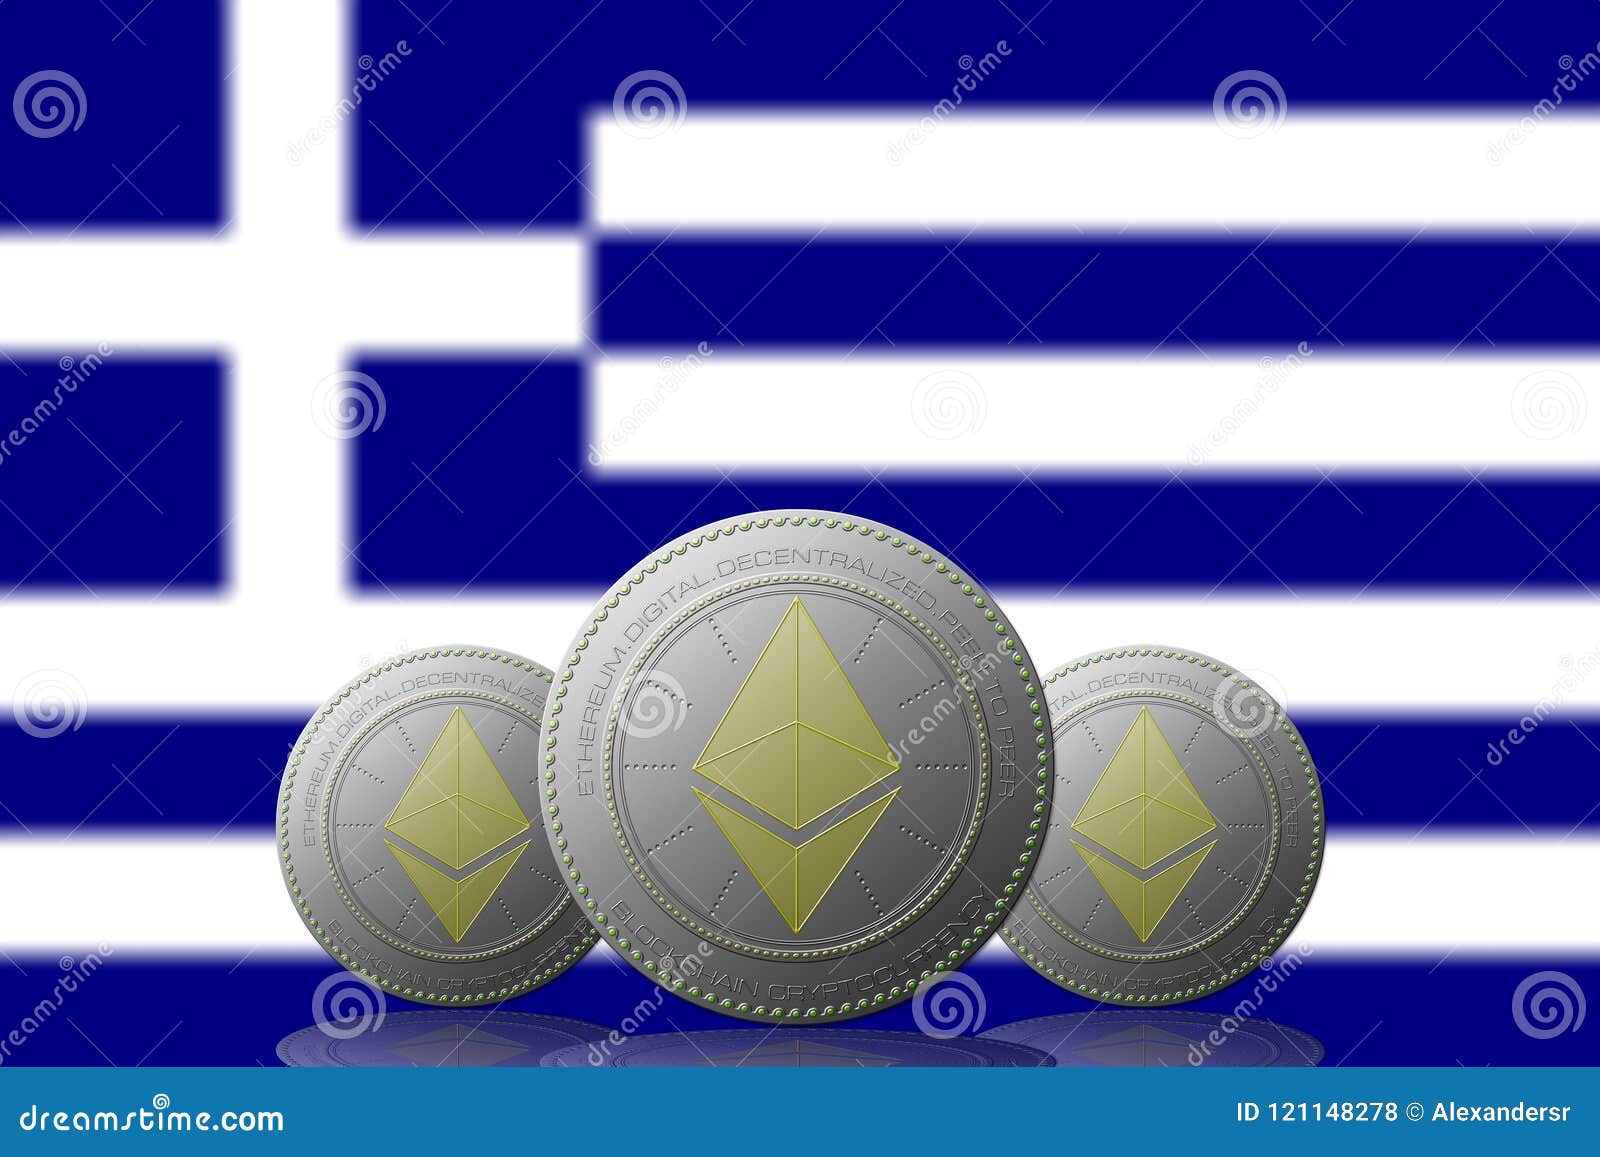 Cryptocurrency greece man lost hard drive with bitcoins